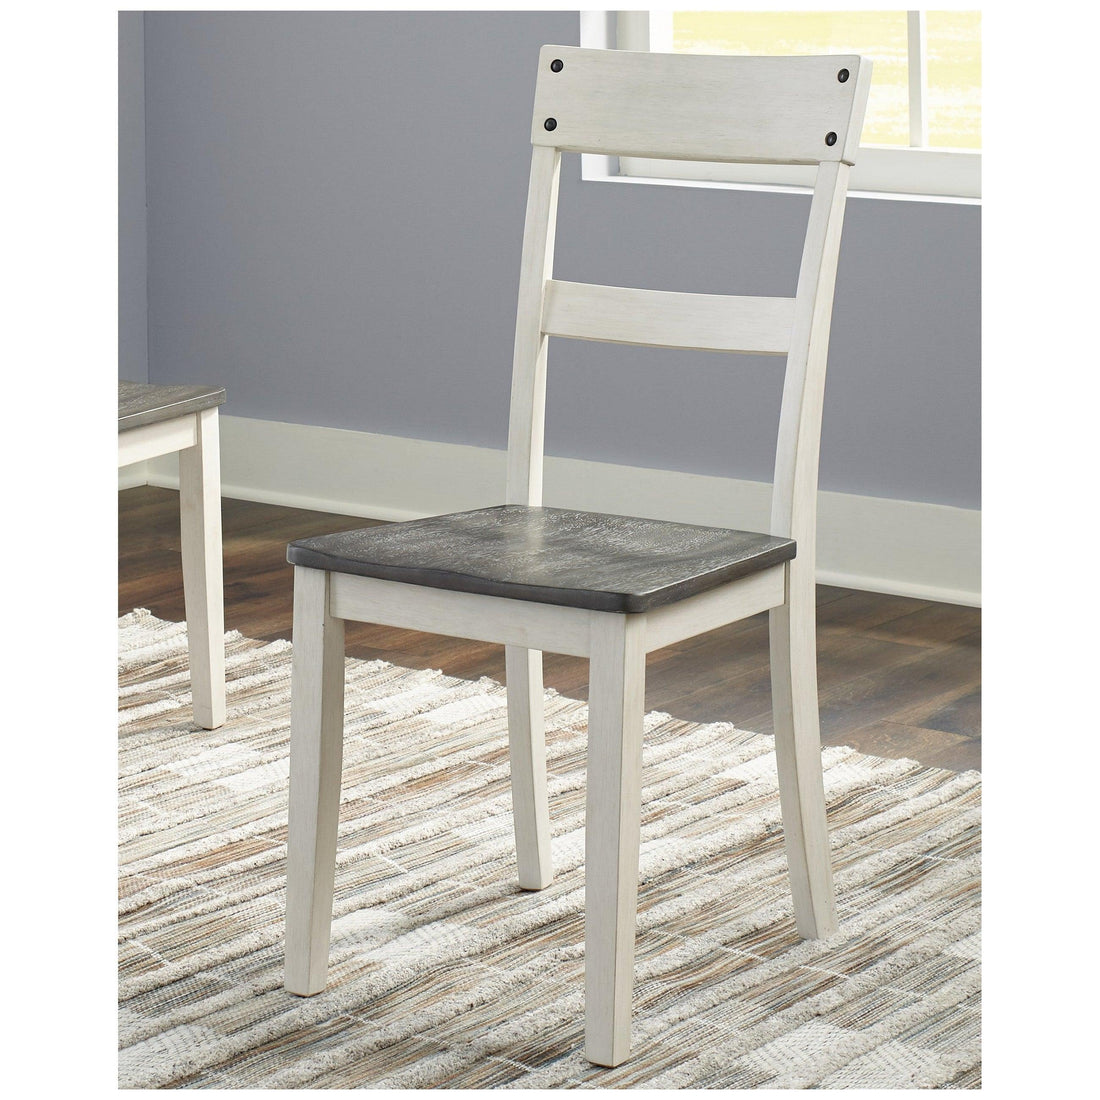 Nelling Dining Chair Ash-D287-01